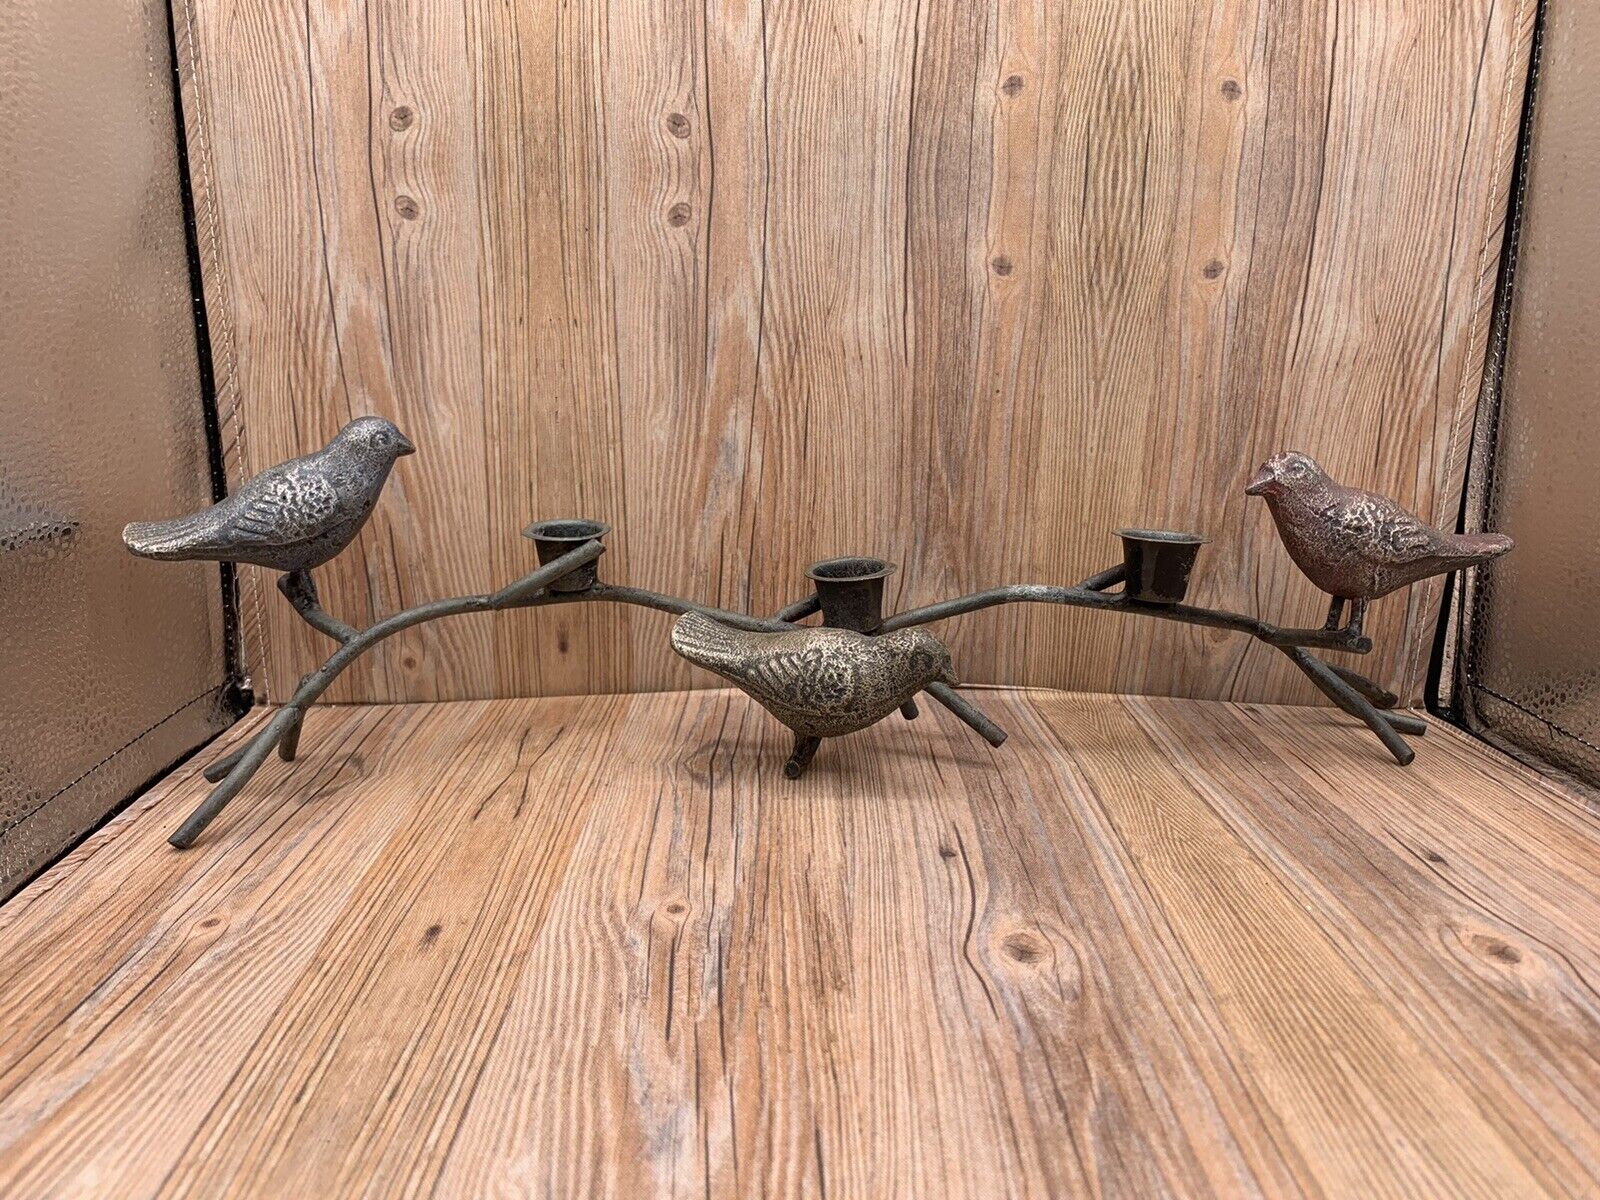 Antique Vintage Candle Holder cast iron 3 birds on a branch Three Candle